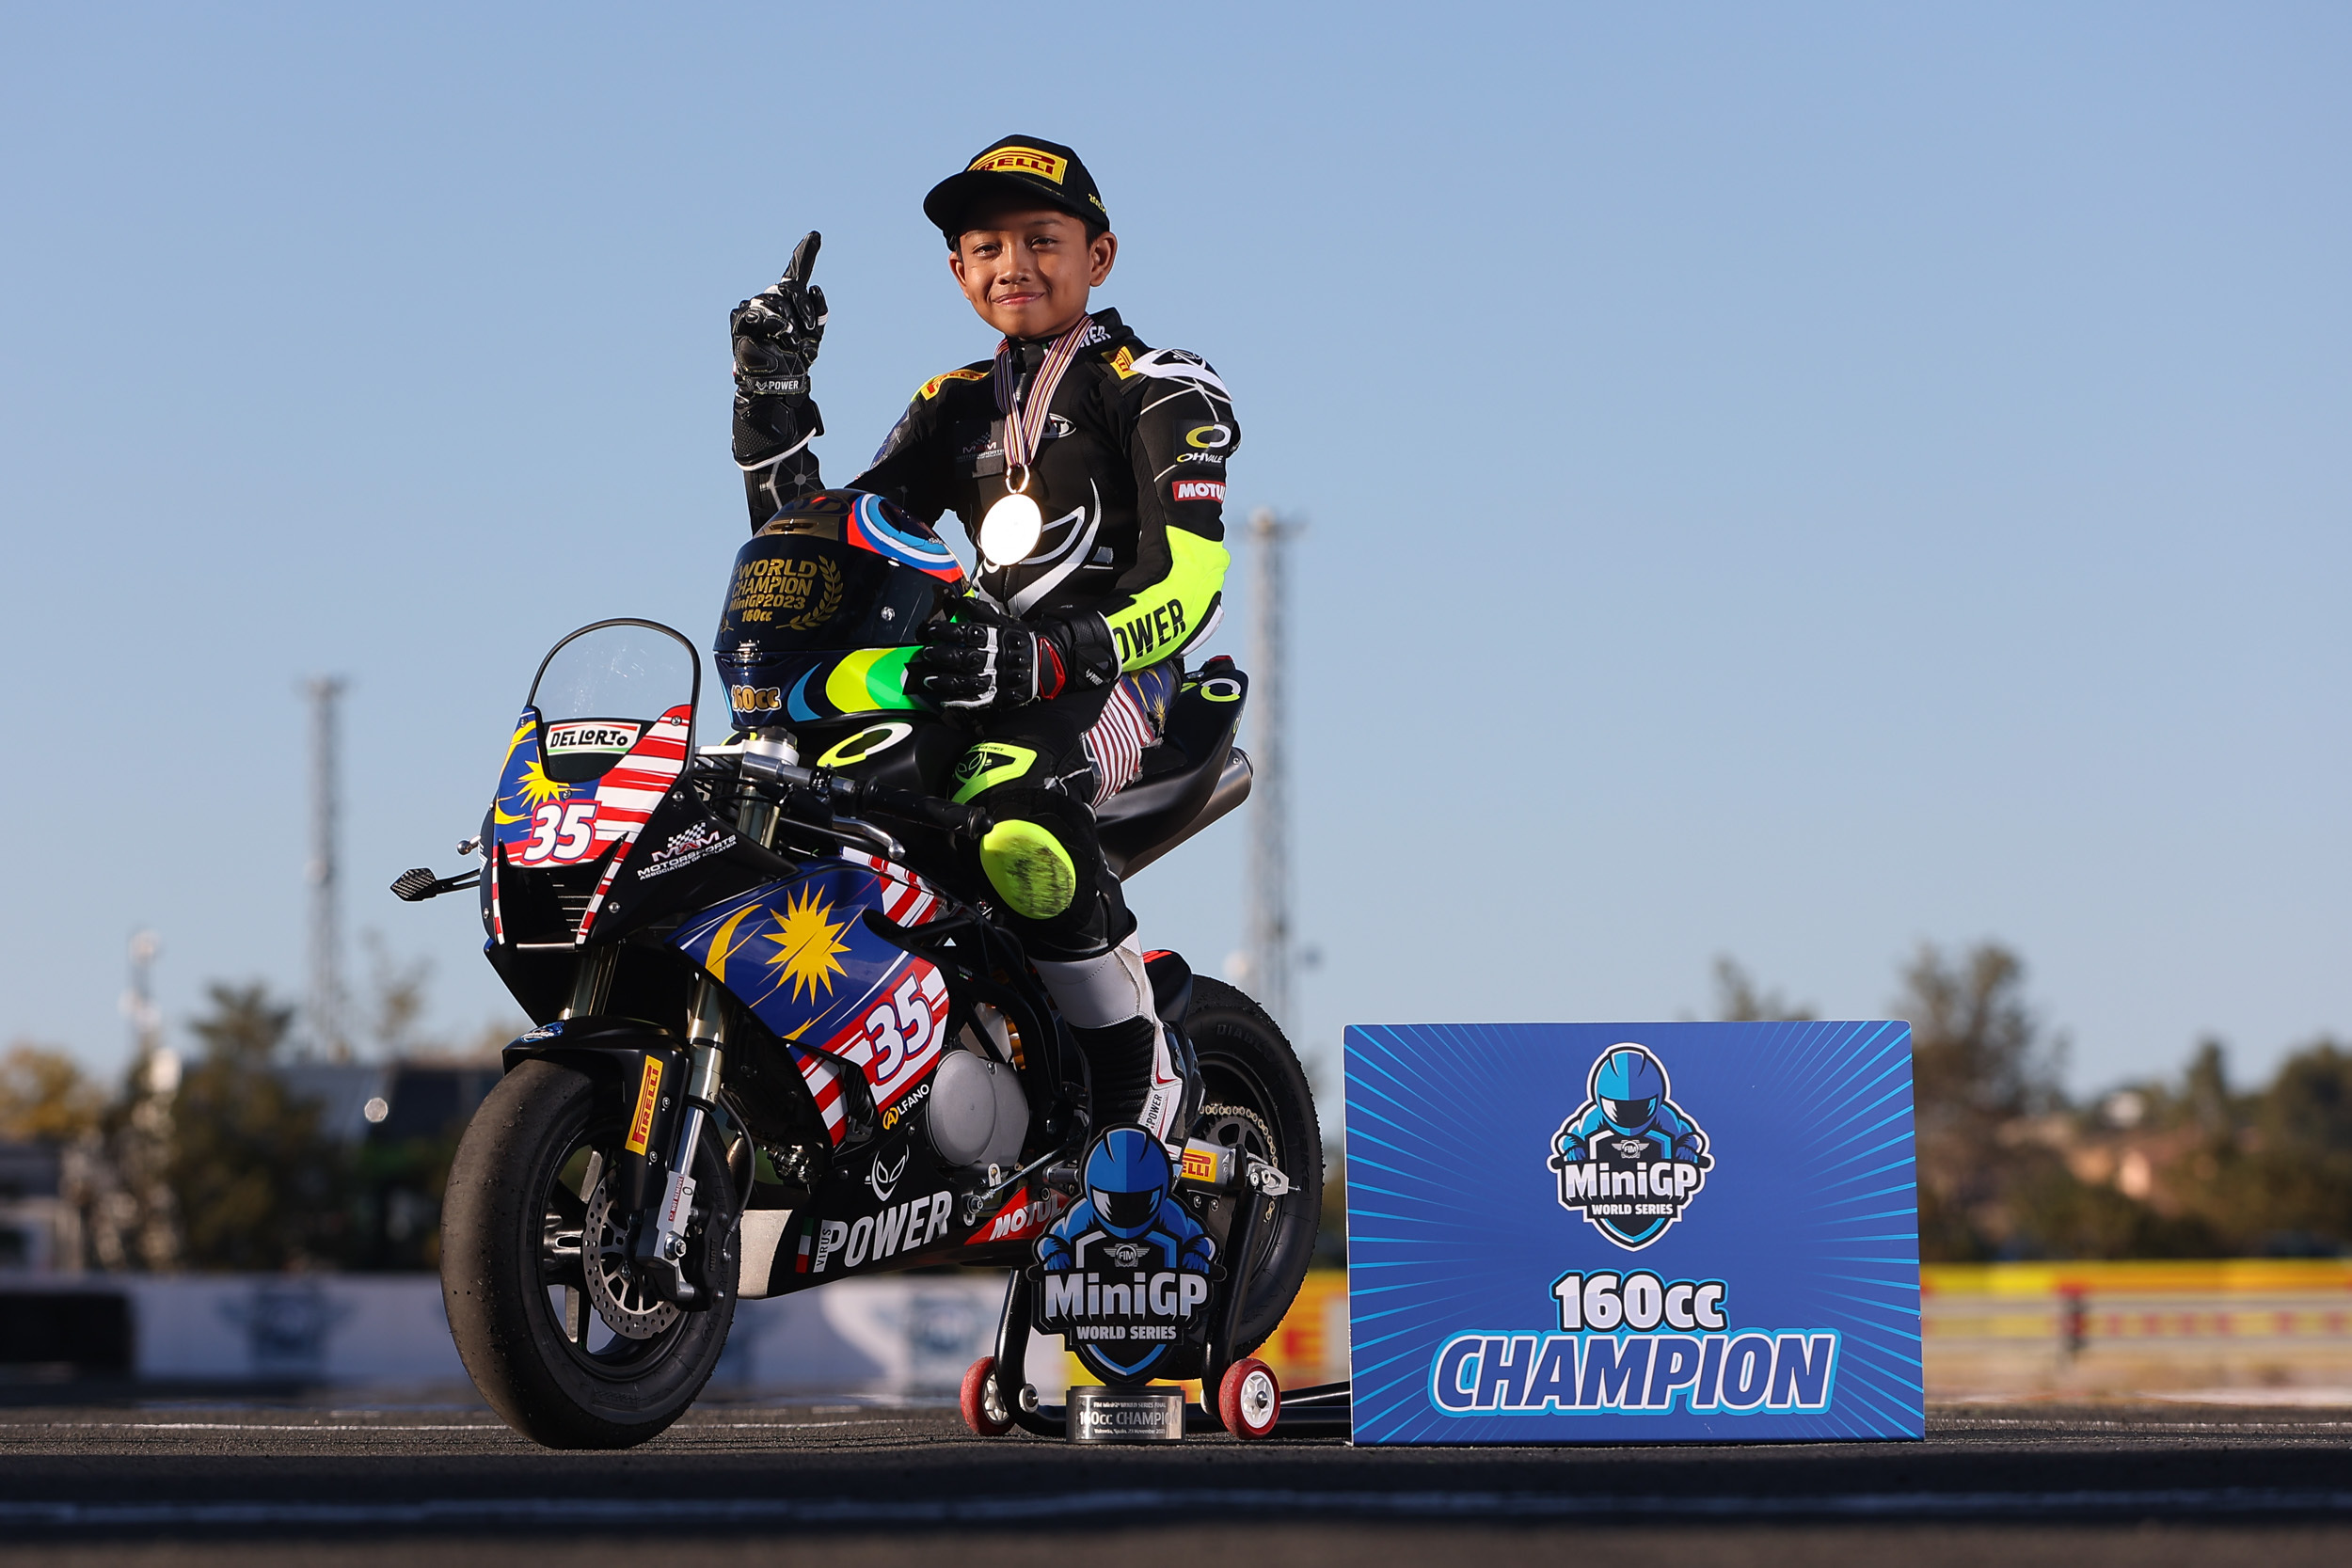 Qabil Irfan is crowned the 160cc Champion at the Circuit Ricardo Tormo